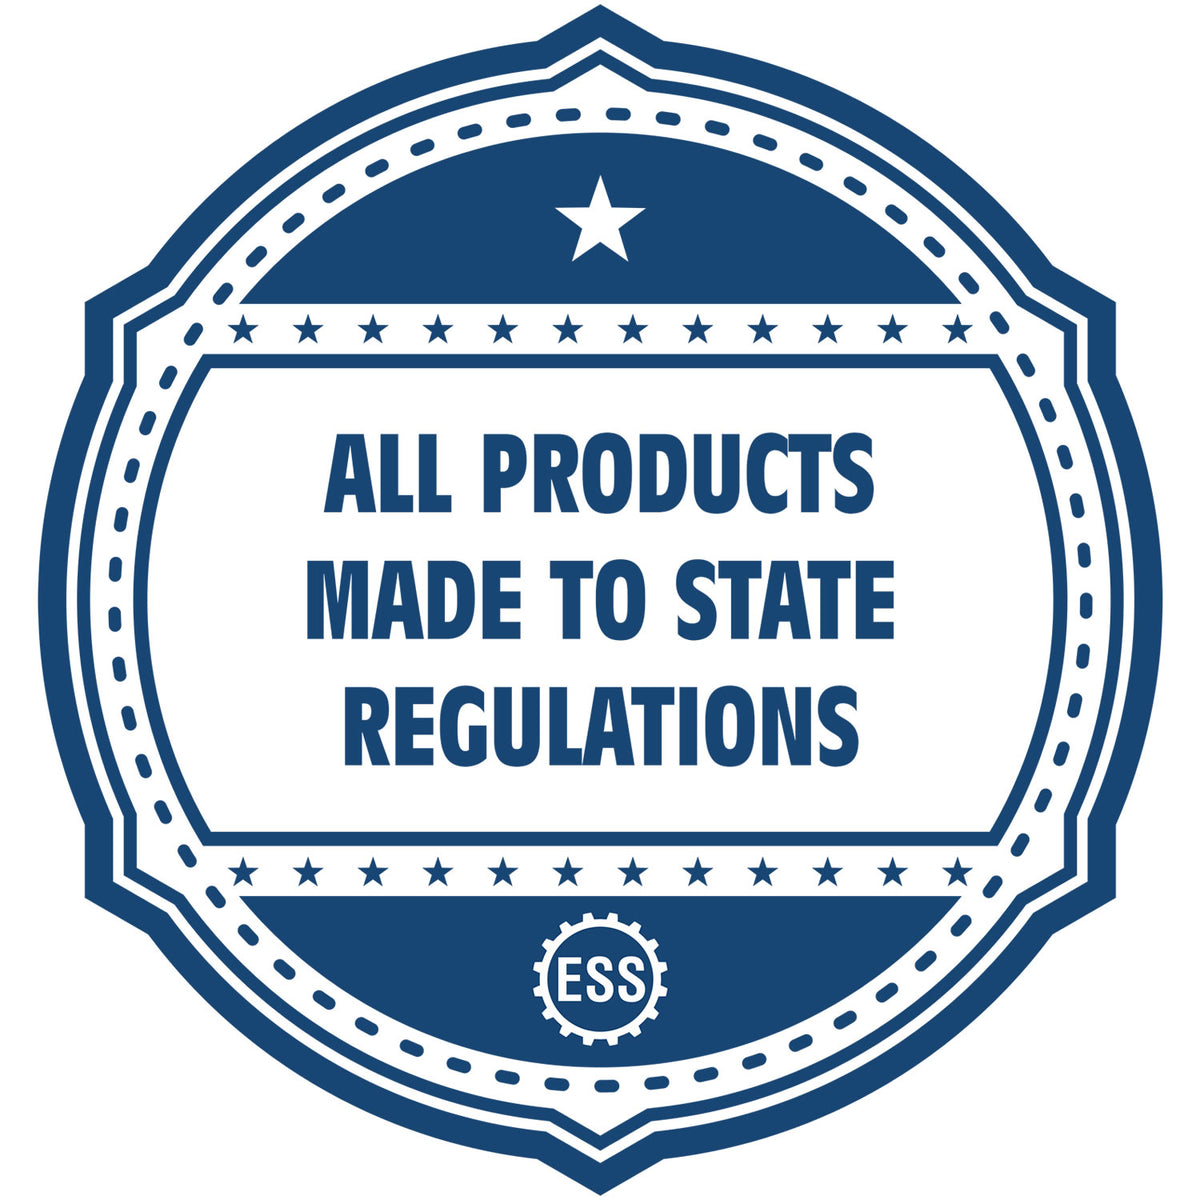 An icon or badge element for the State of Kansas Long Reach Architectural Embossing Seal showing that this product is made in compliance with state regulations.